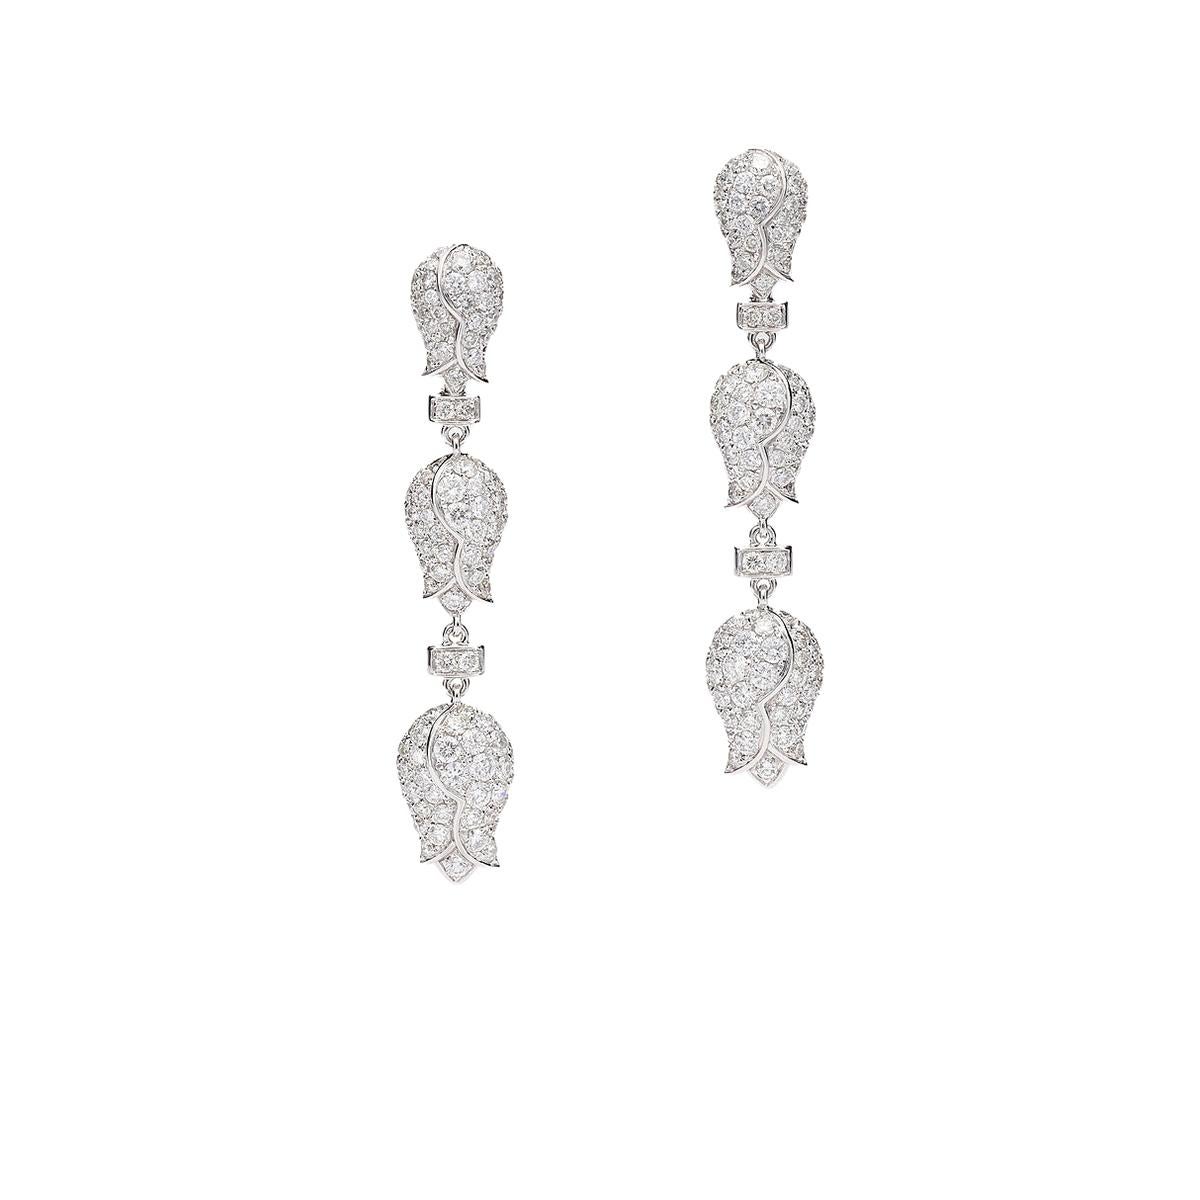 Earrings in 18kt white gold set with 242 diamonds 3.96 cts